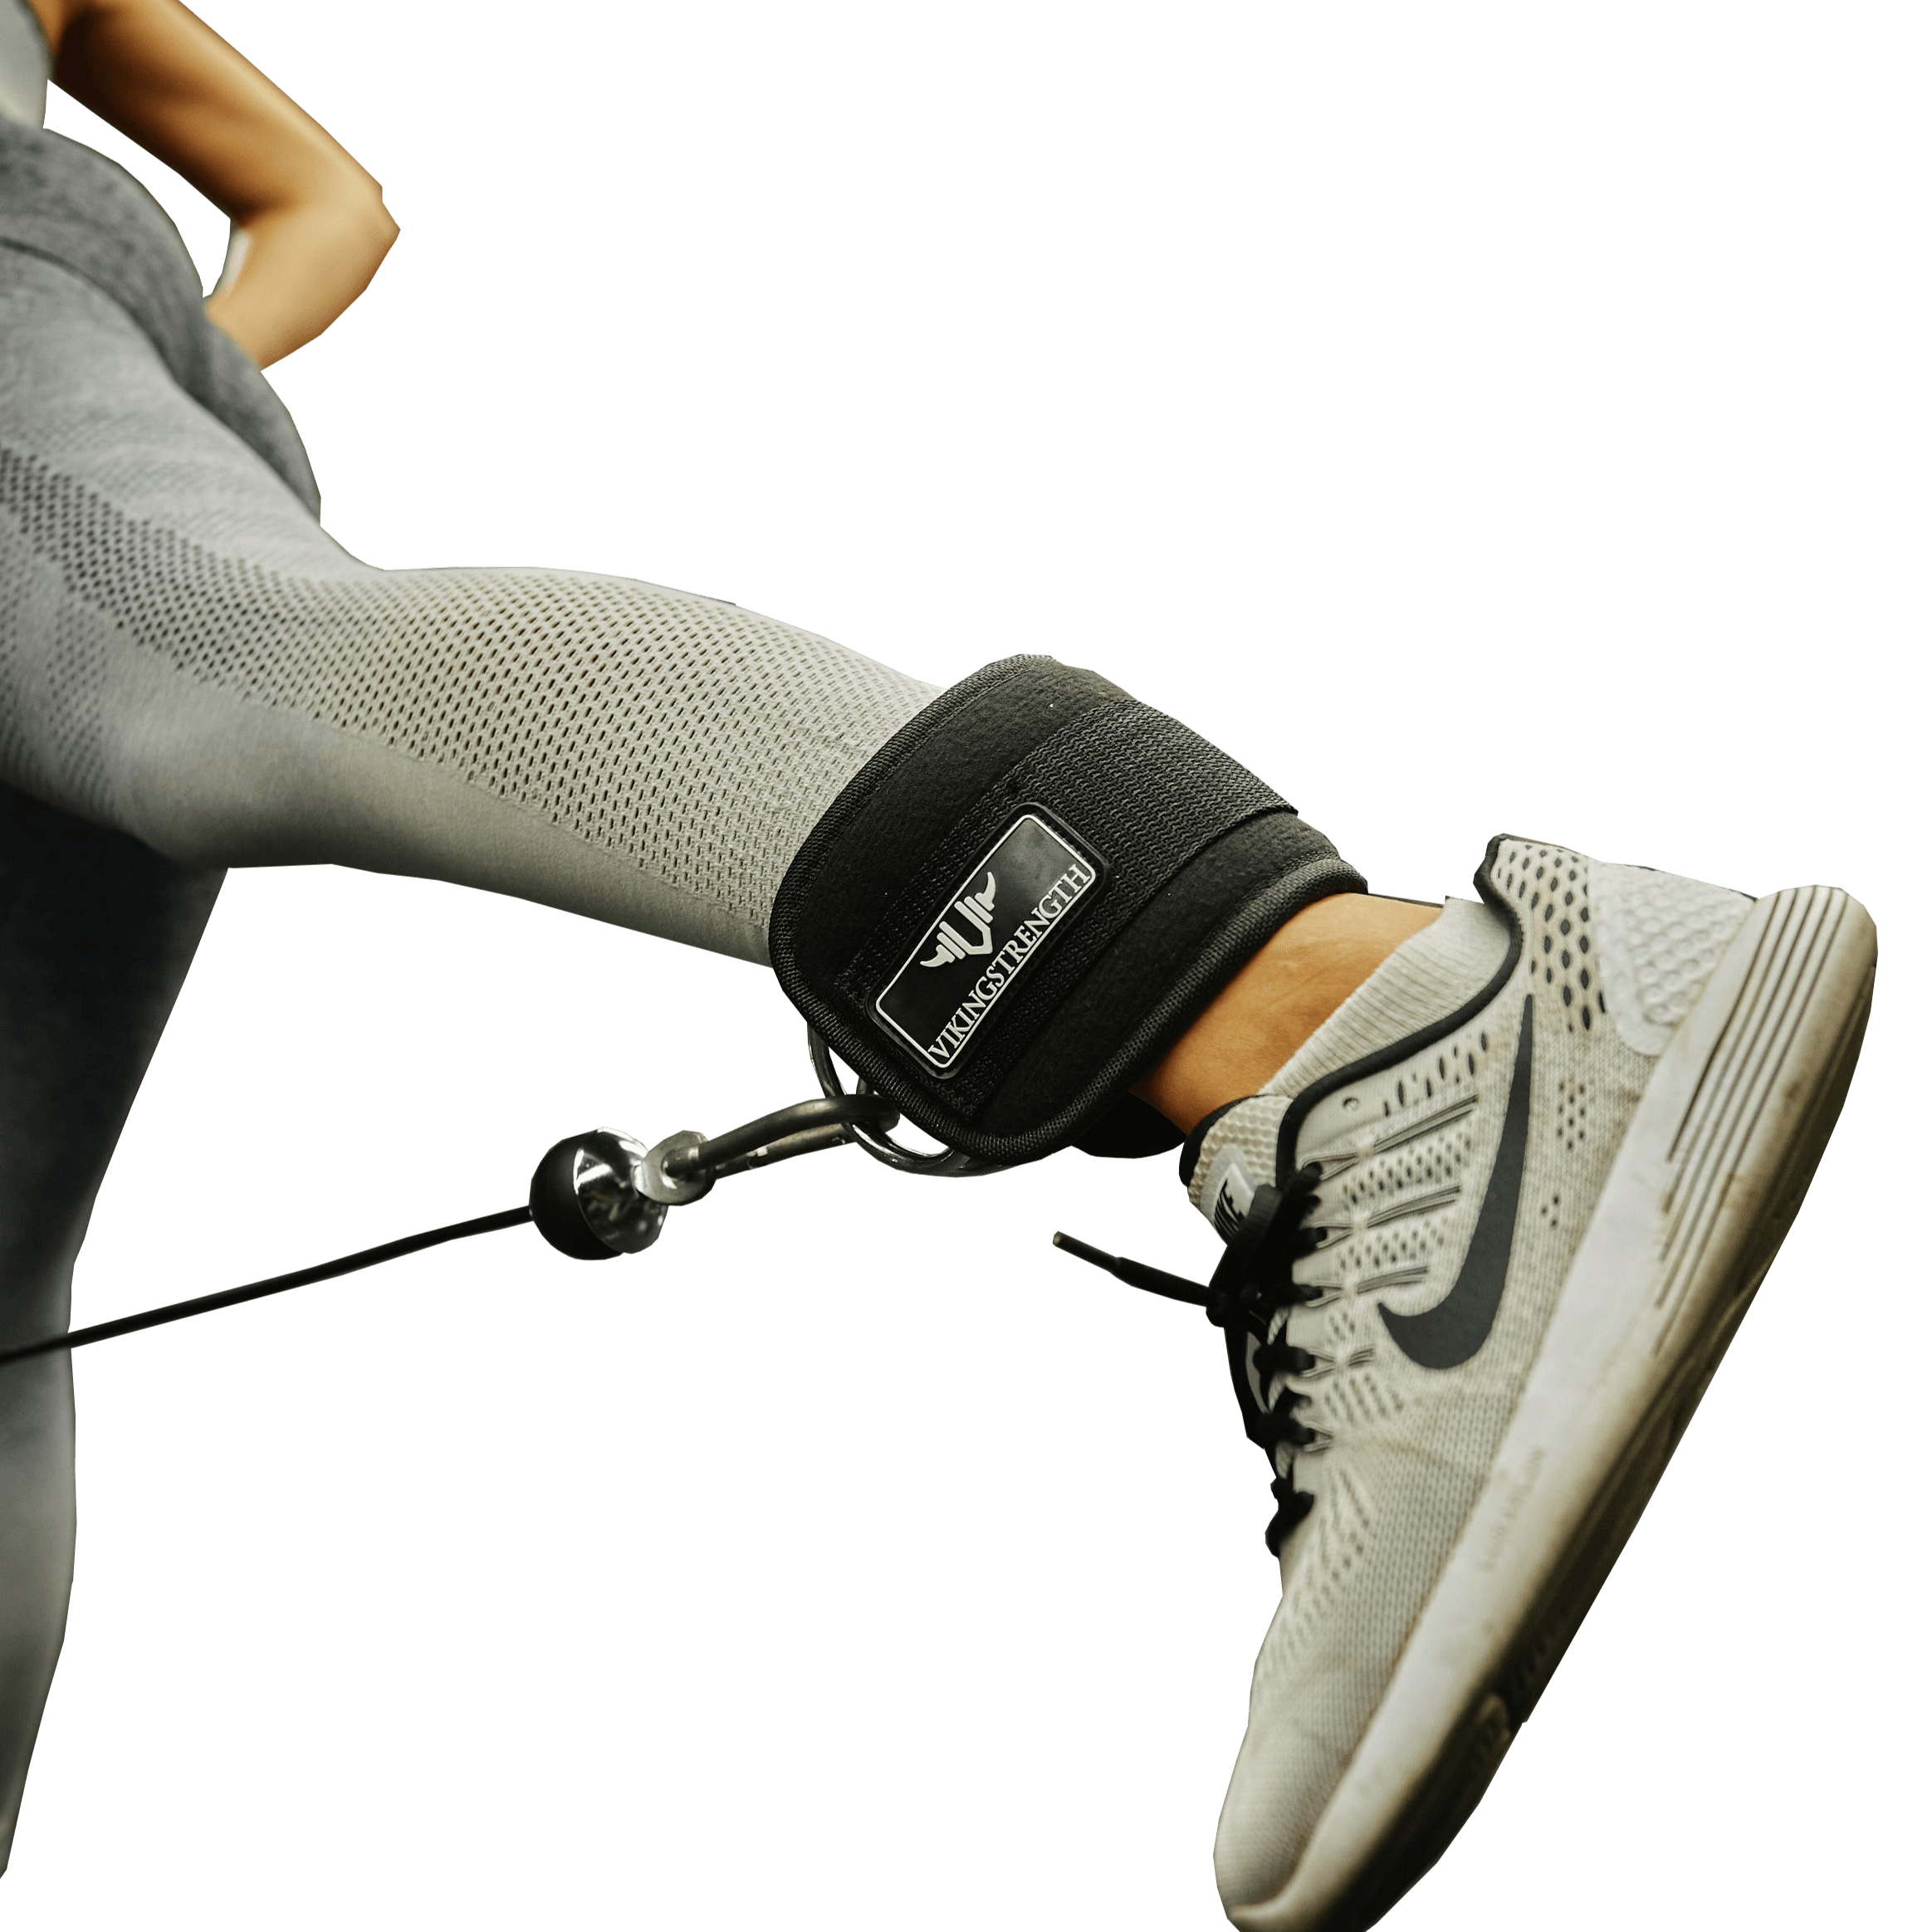 How to Use Ankle Straps for Cable Machines, Cable Workout